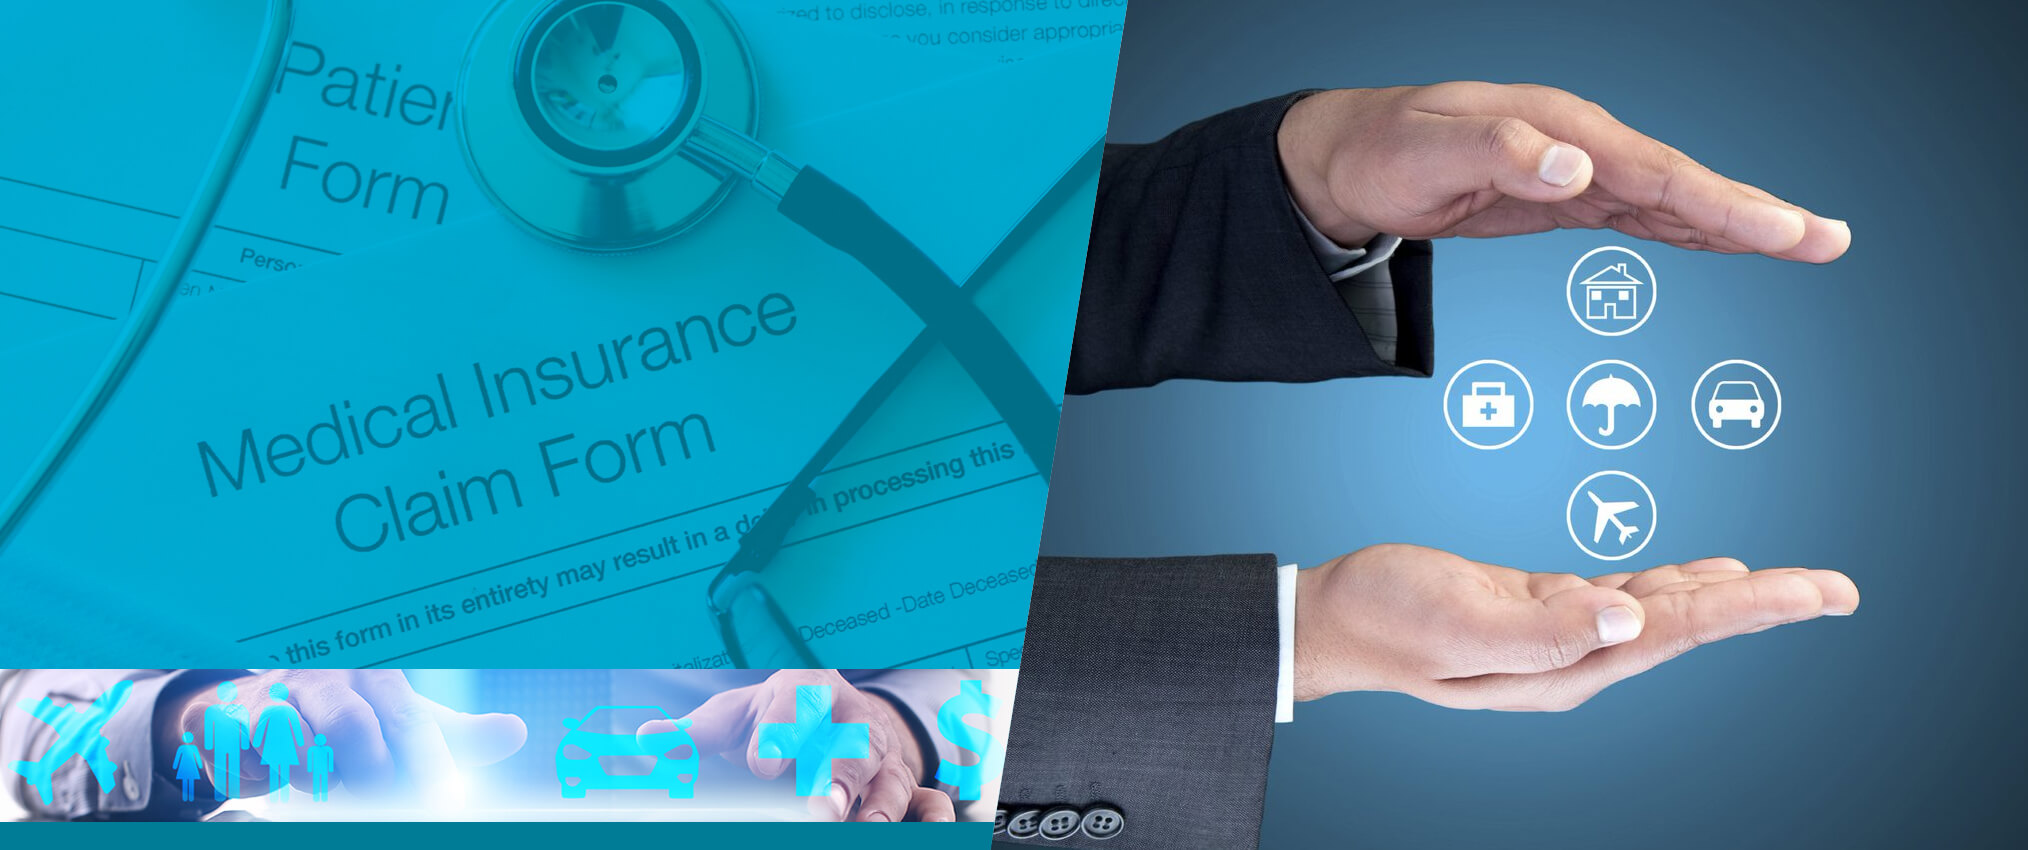 Insurance Claim Processing Services Enable Insurance Firms to Access Documents Remotely and Securely